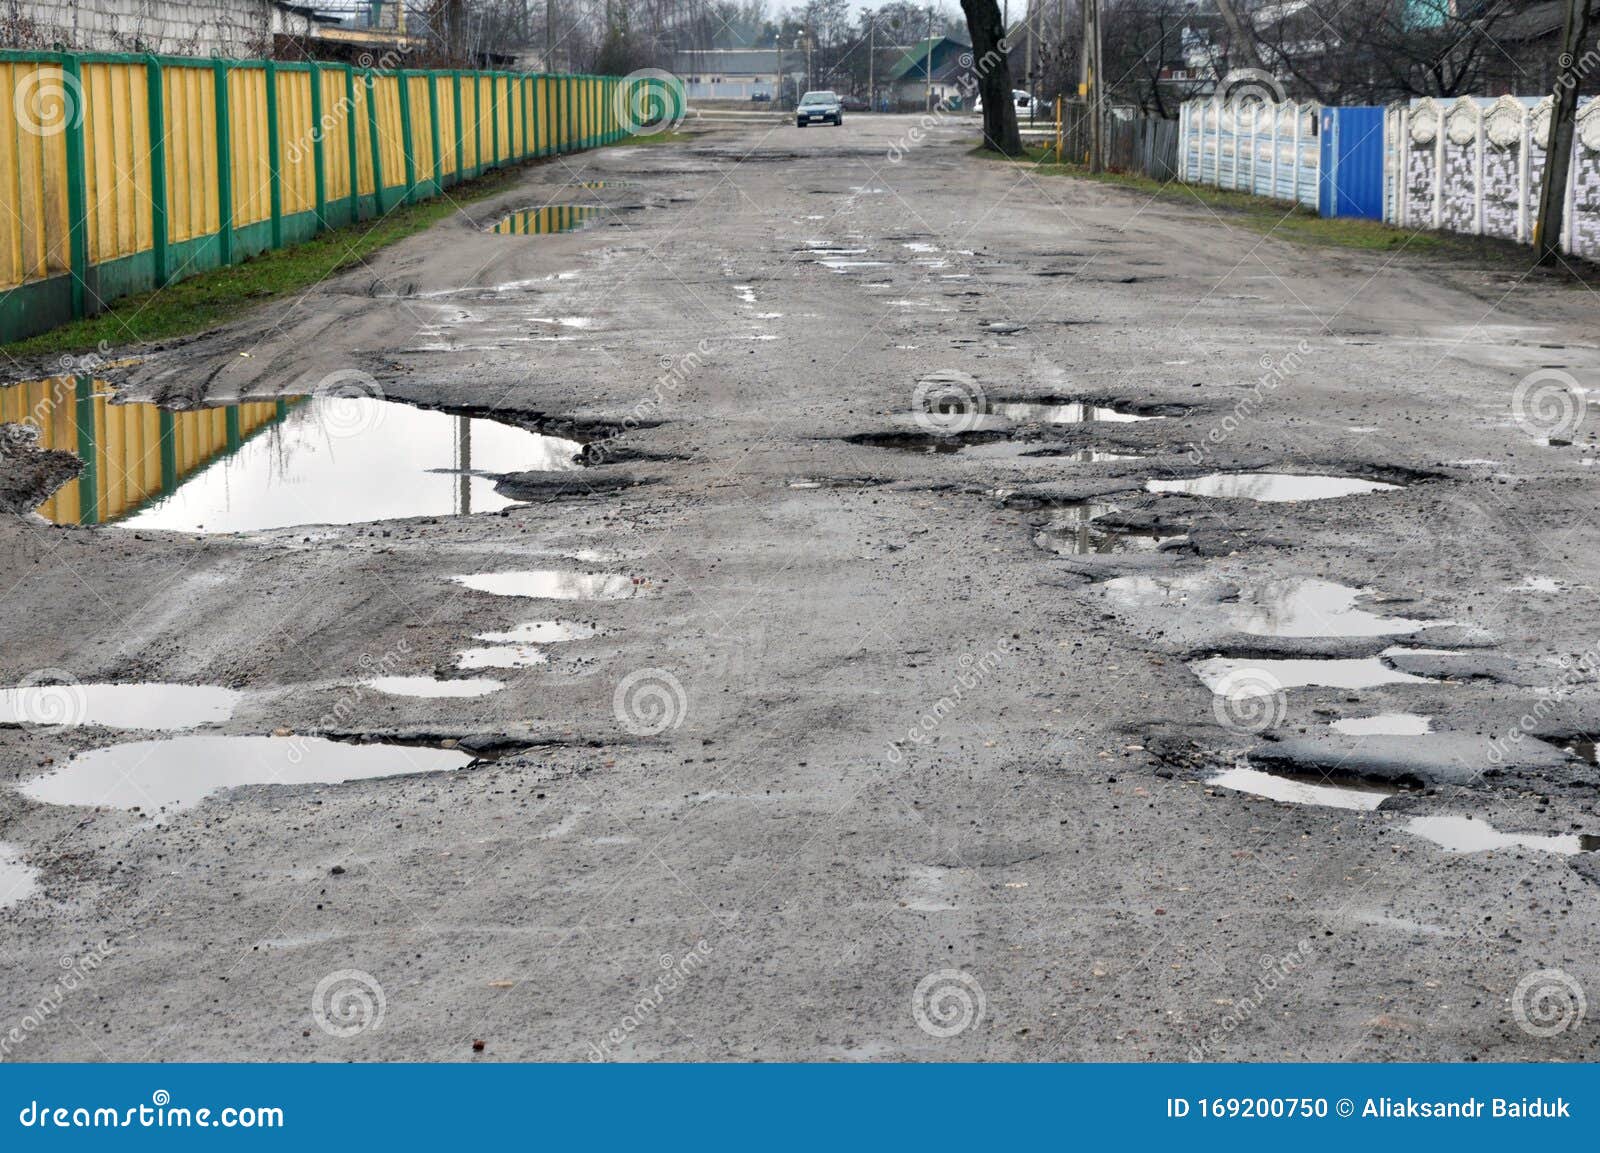 Poor Road Conditions Holes In The Asphalt The Risk Of Driving A Car